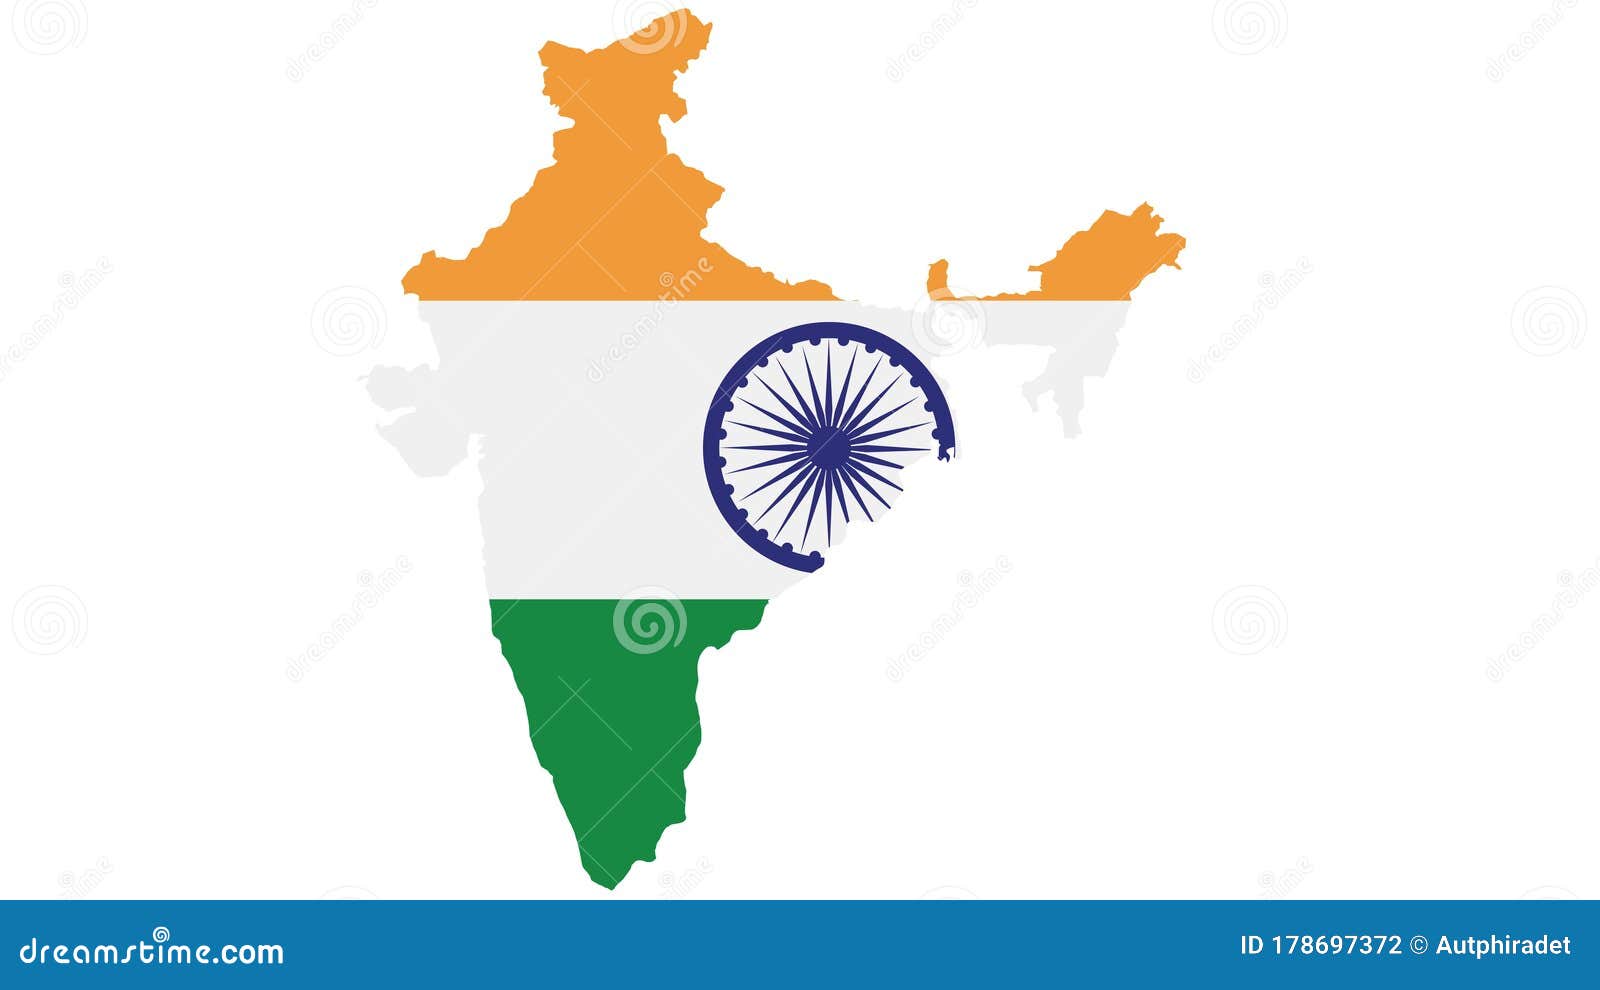 India Map with Flag Texture on White Background, Illustration,textured ,  Symbols of India,for Advertising ,promote, TV Commercial Stock Illustration  - Illustration of sign, flag: 178697372